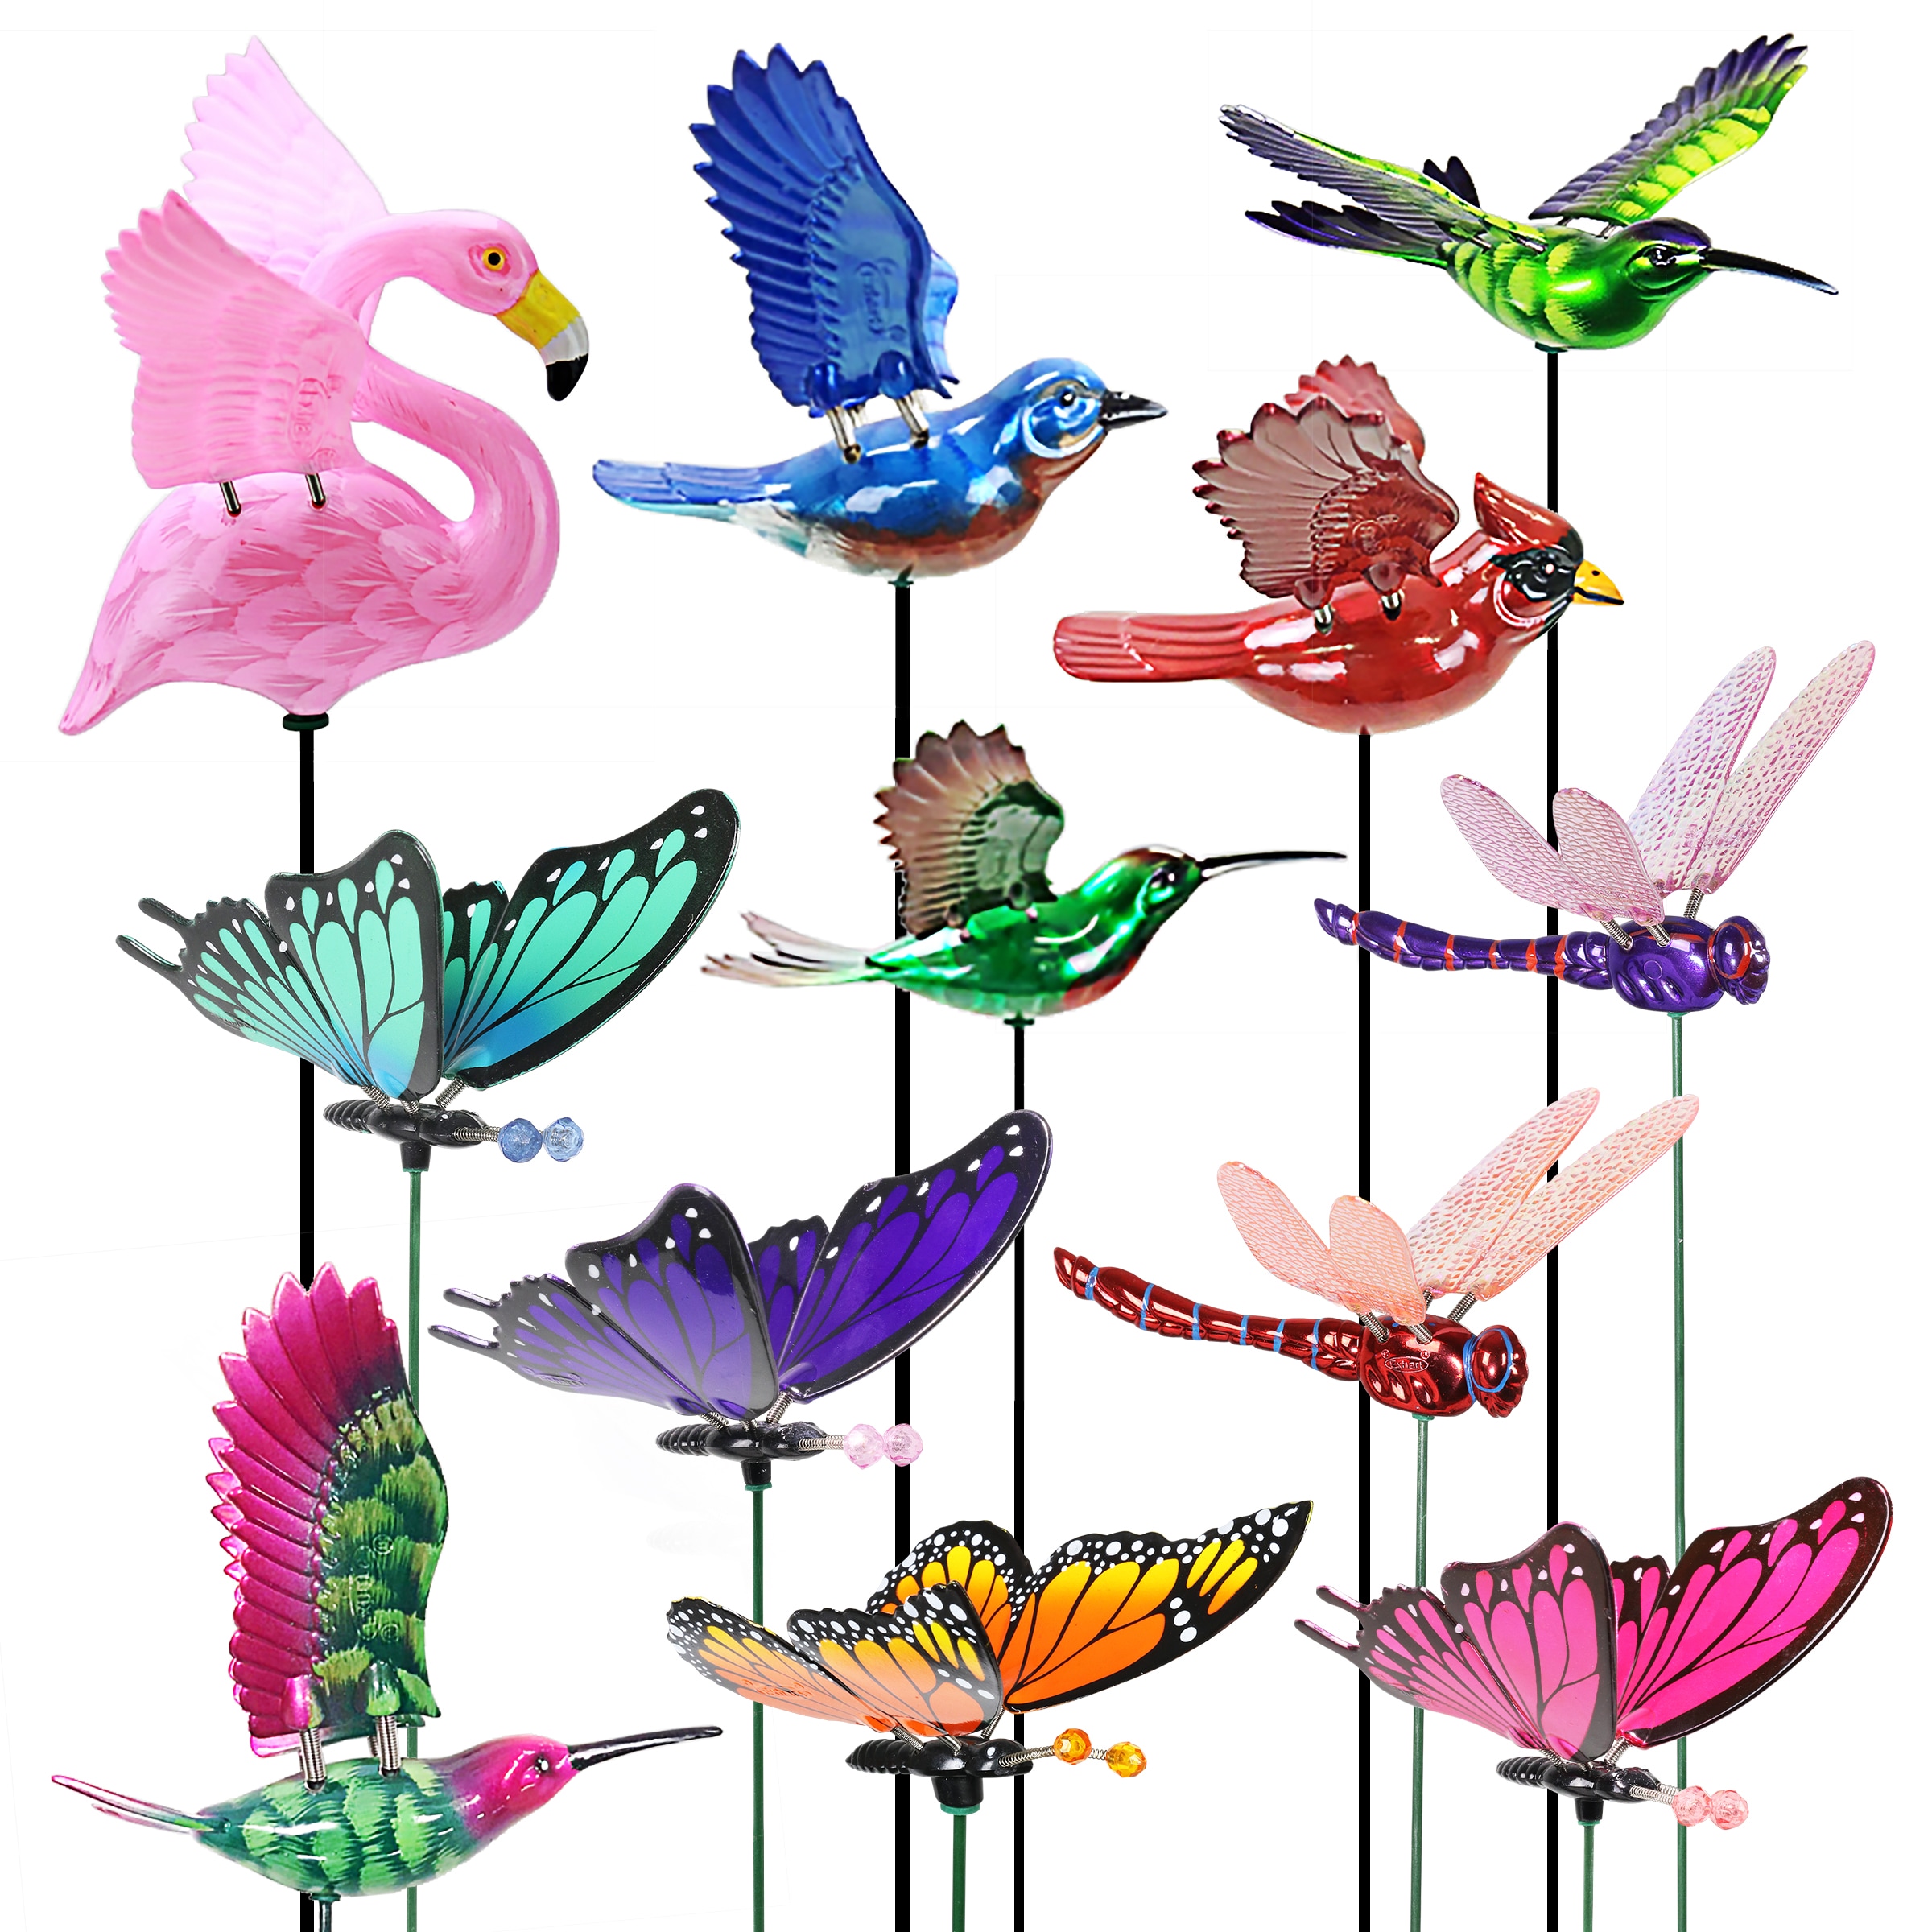 Songbird Essentials Hummingbird with Upright Wings Small Window Thermometer